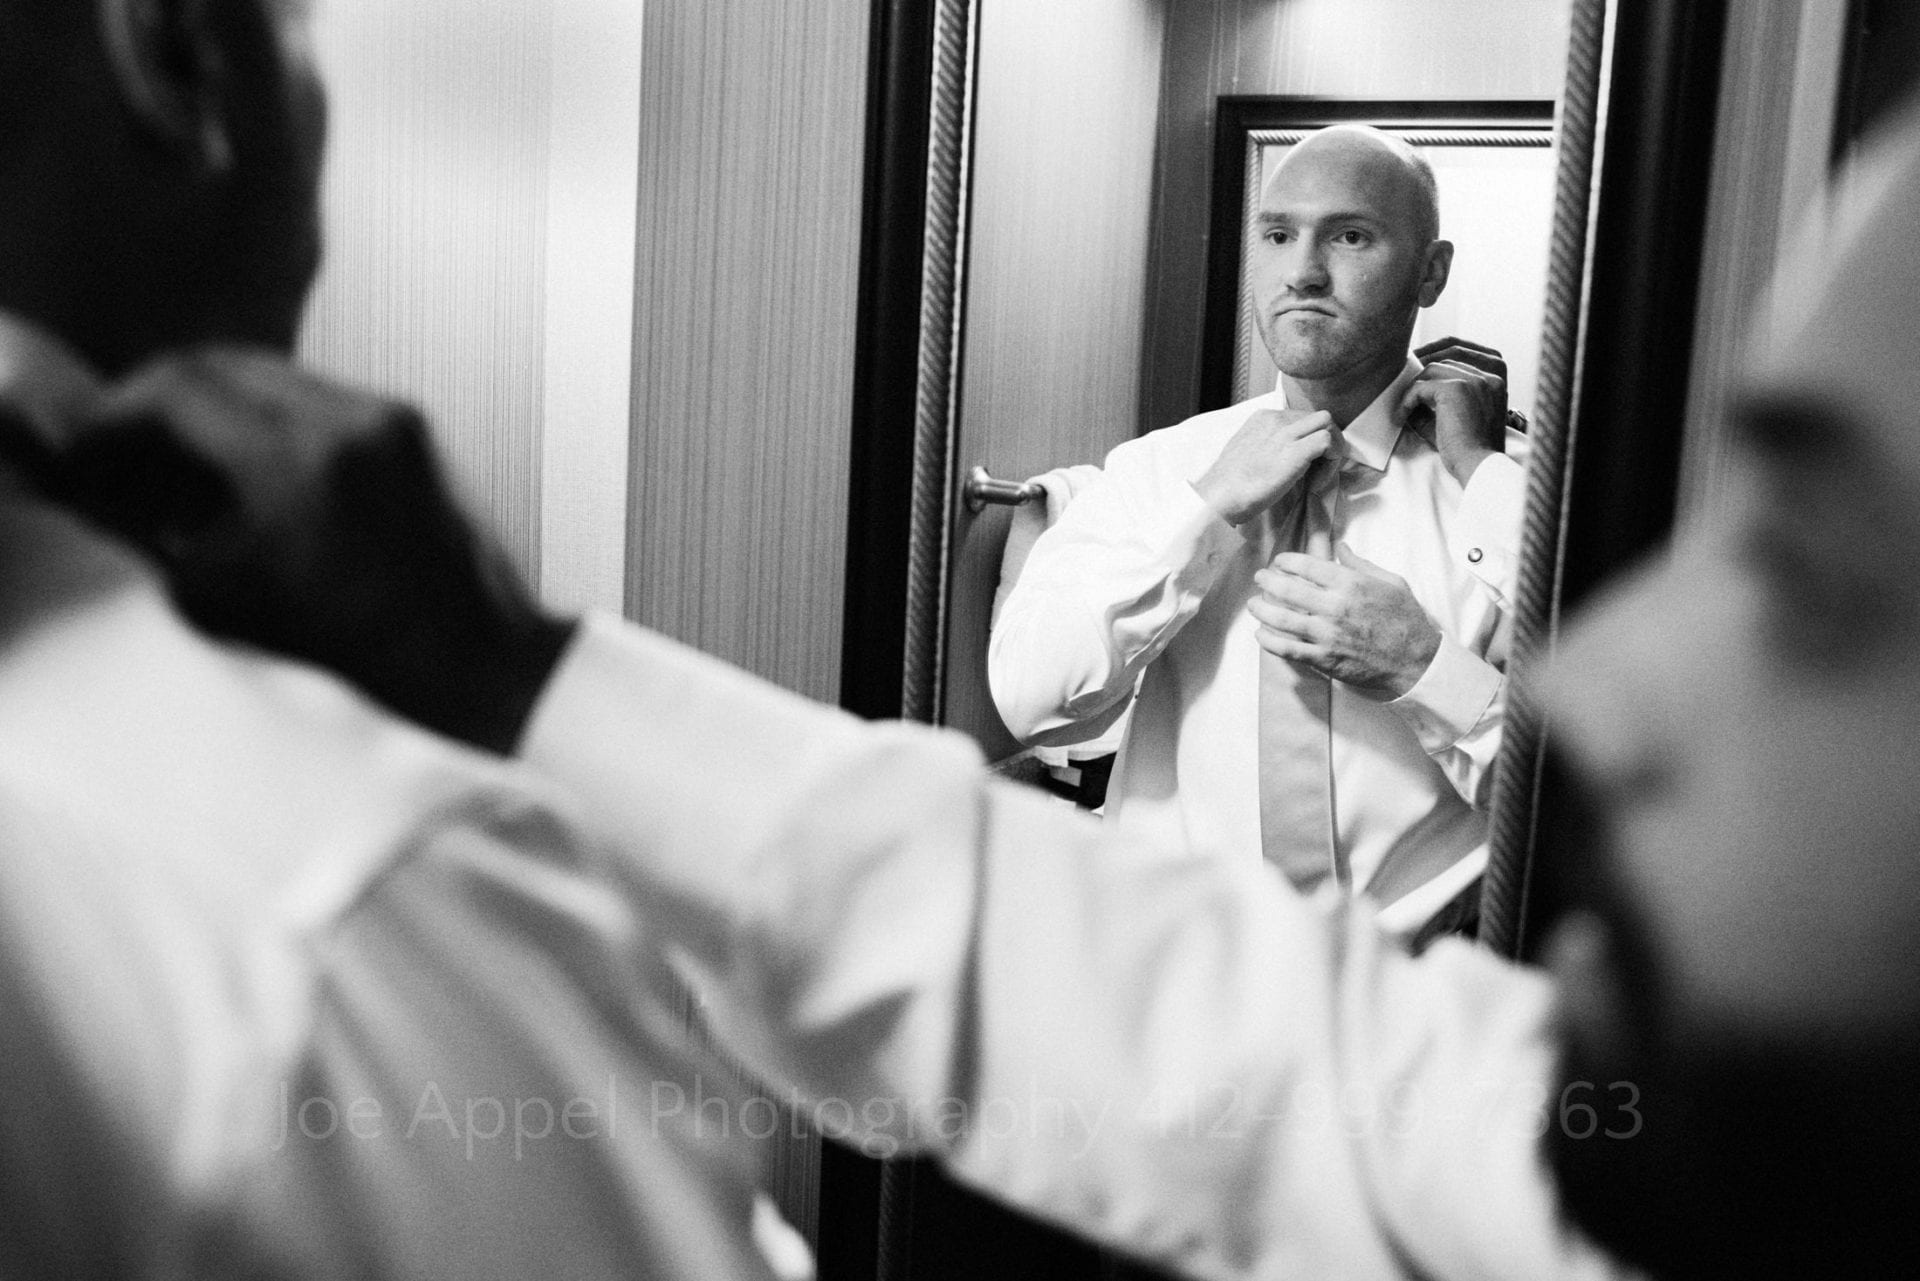 A groom with a shaved head adjusts his tie in a mirror as a friend fixes his collar for him.